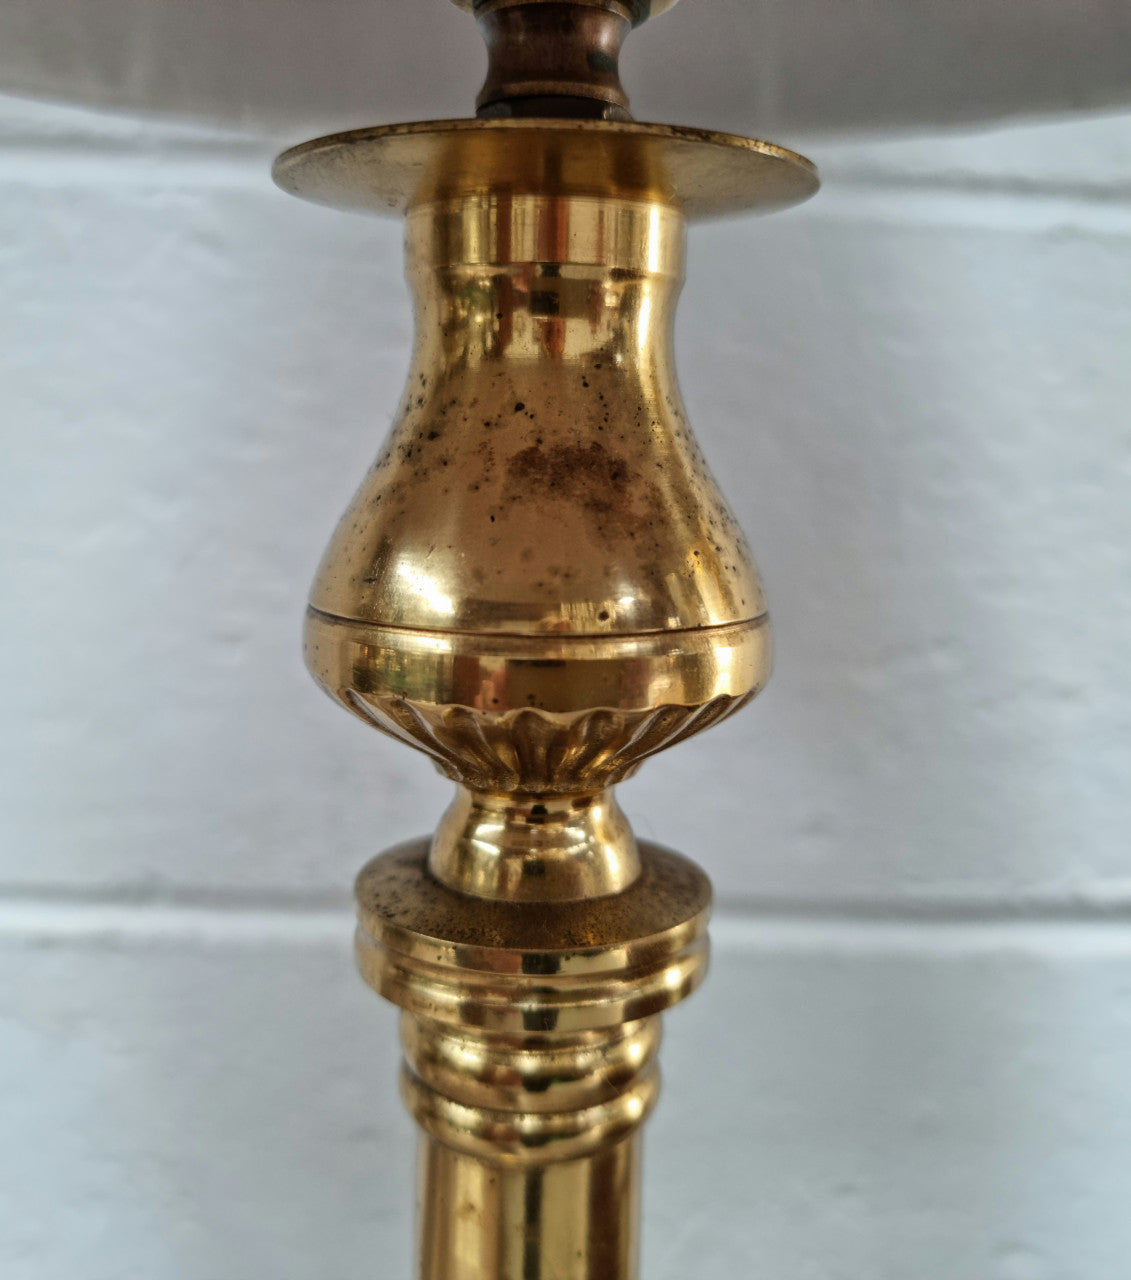 Lovely Vintage marble and brass table lamp, it is in good original working condition.